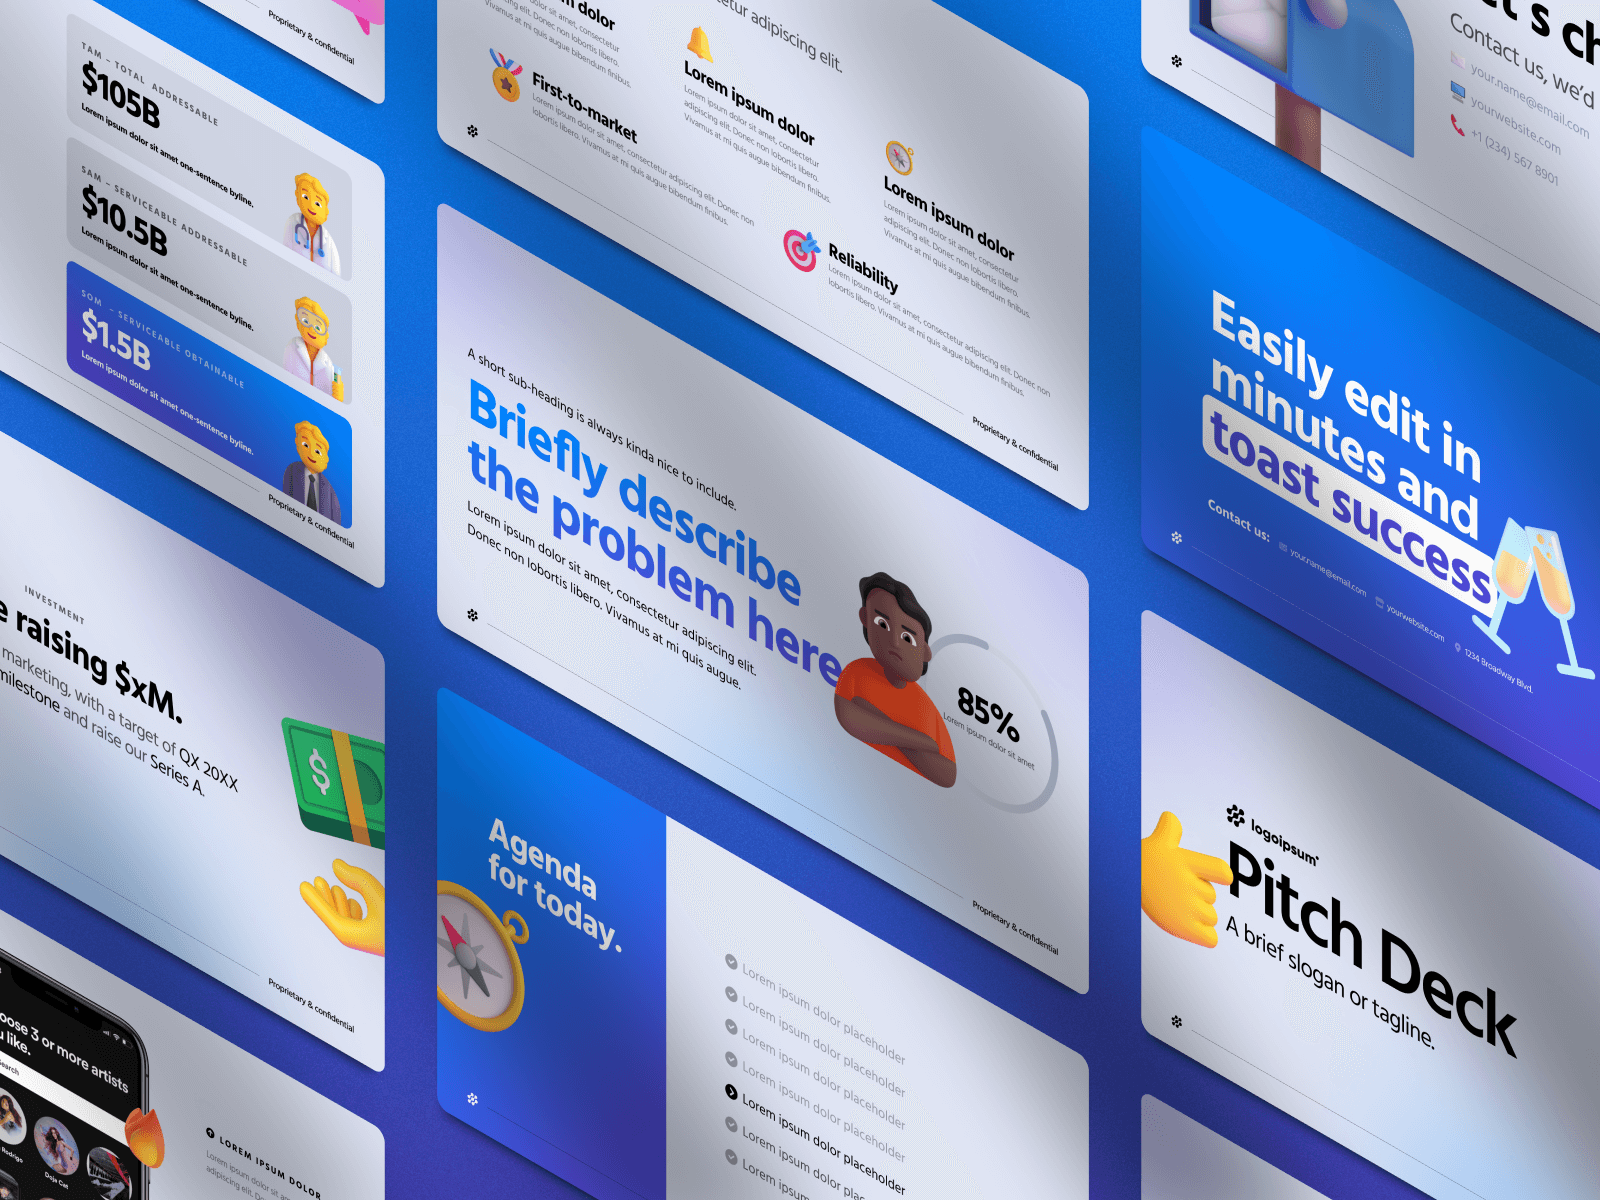 Fluent UI Pitch Deck - Investor Presentation Template for Figma: close funding, deals, partnerships and more | VIP.graphics